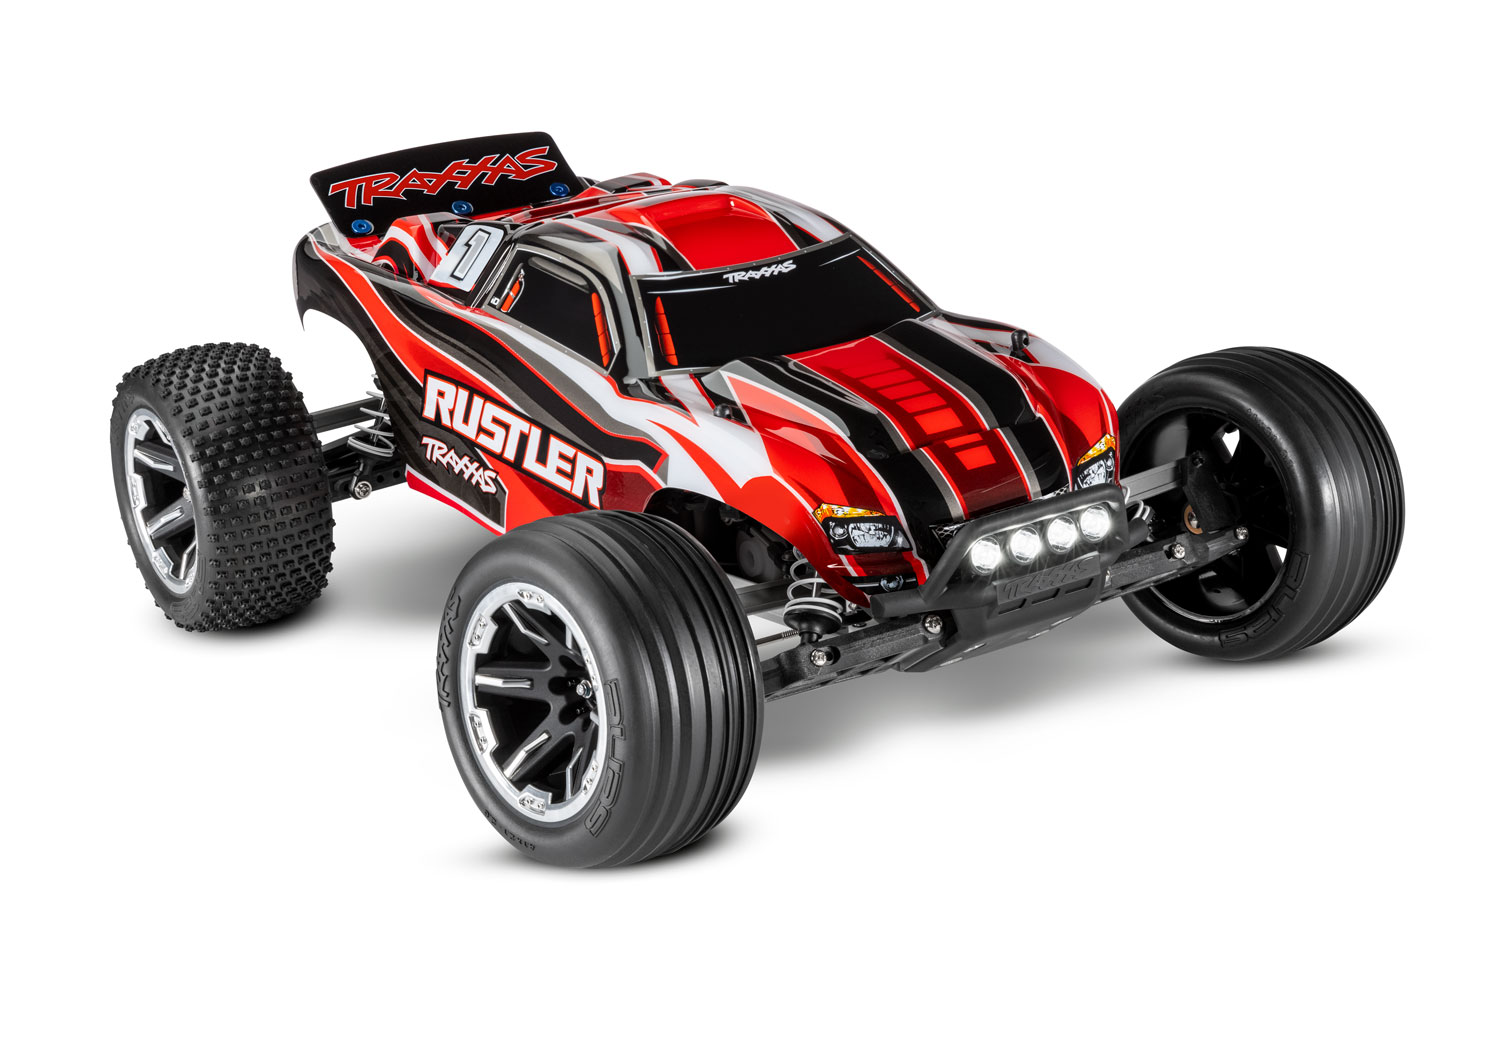 Traxxas Rustler XL5 2WD electro truggy RTR 2.4Ghz met LED verlichting inclusief Power Pack - Rood